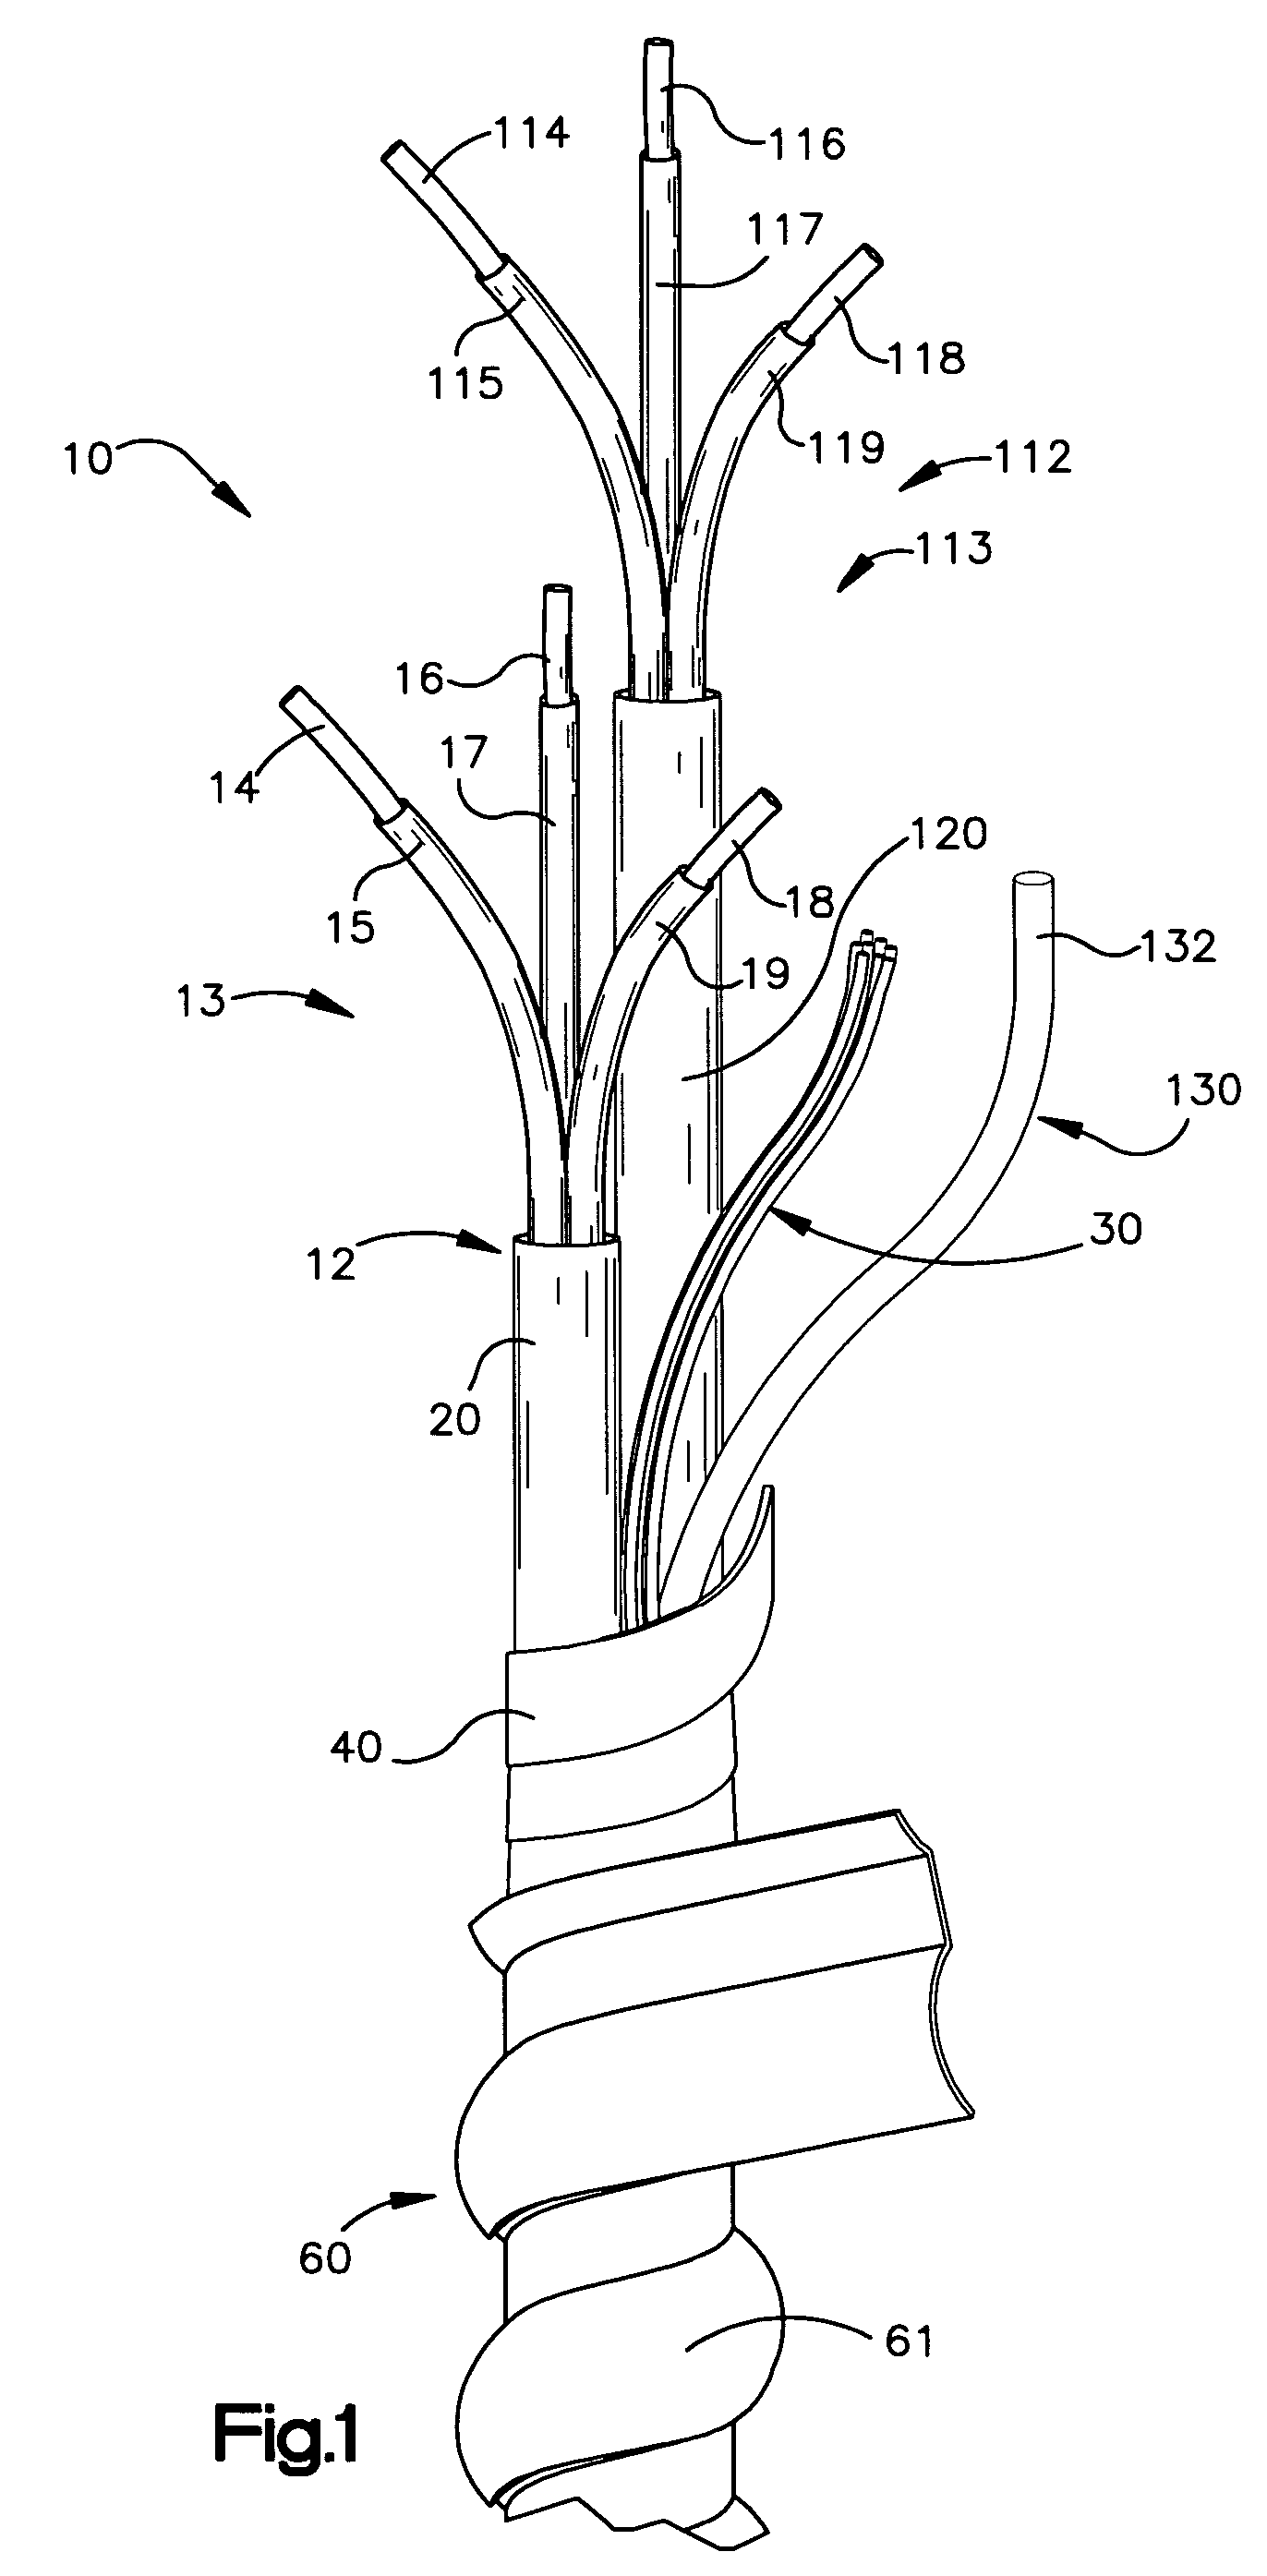 Insulated, high voltage power cable for use with low power signal conductors in conduit